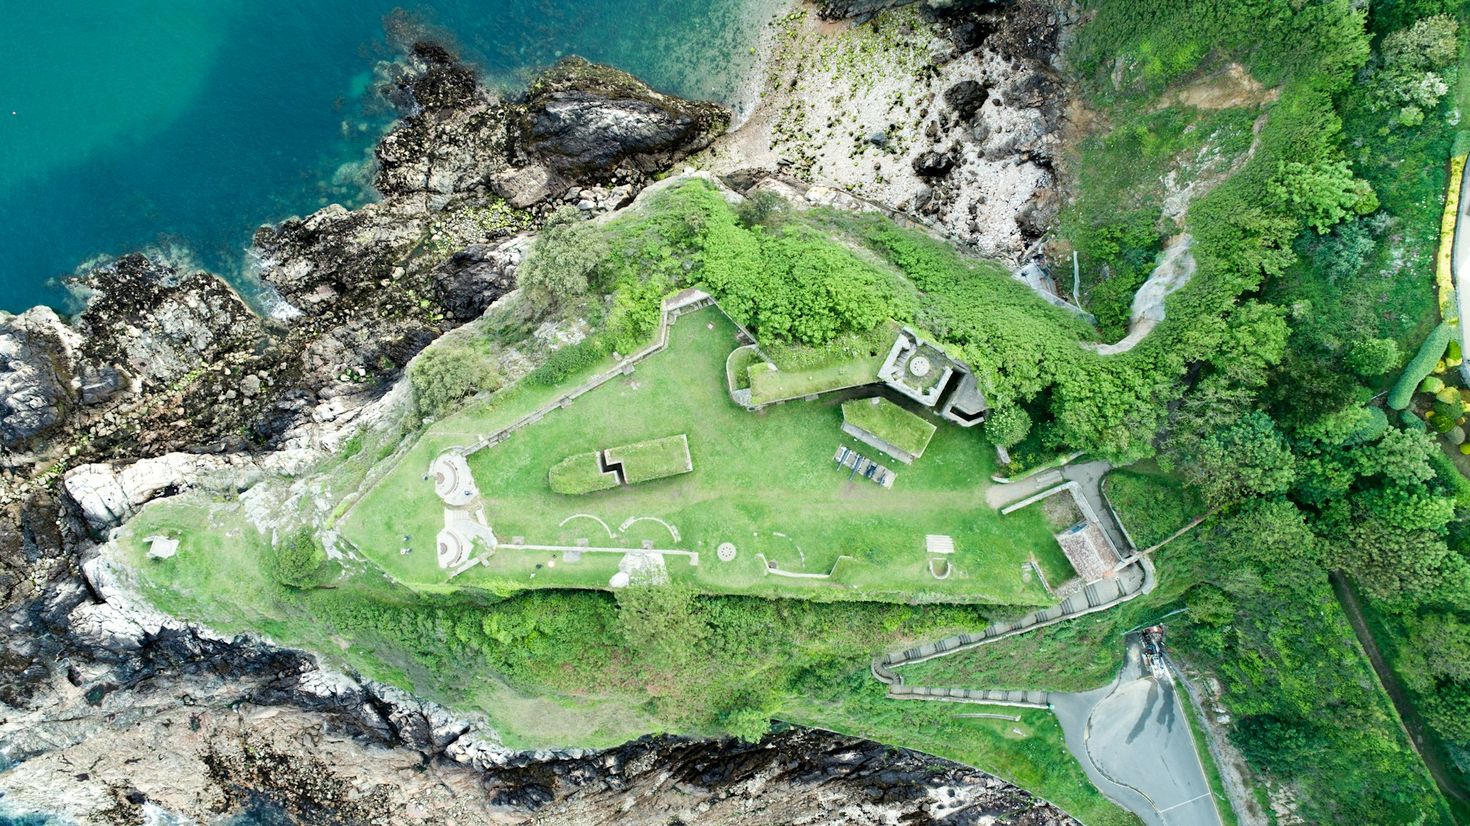 Aerial view of a historic Guernsey coastal fortification on a green headland, with rugged cliffs dropping into the turquoise sea, showcasing a blend of natural beauty and historical architecture.